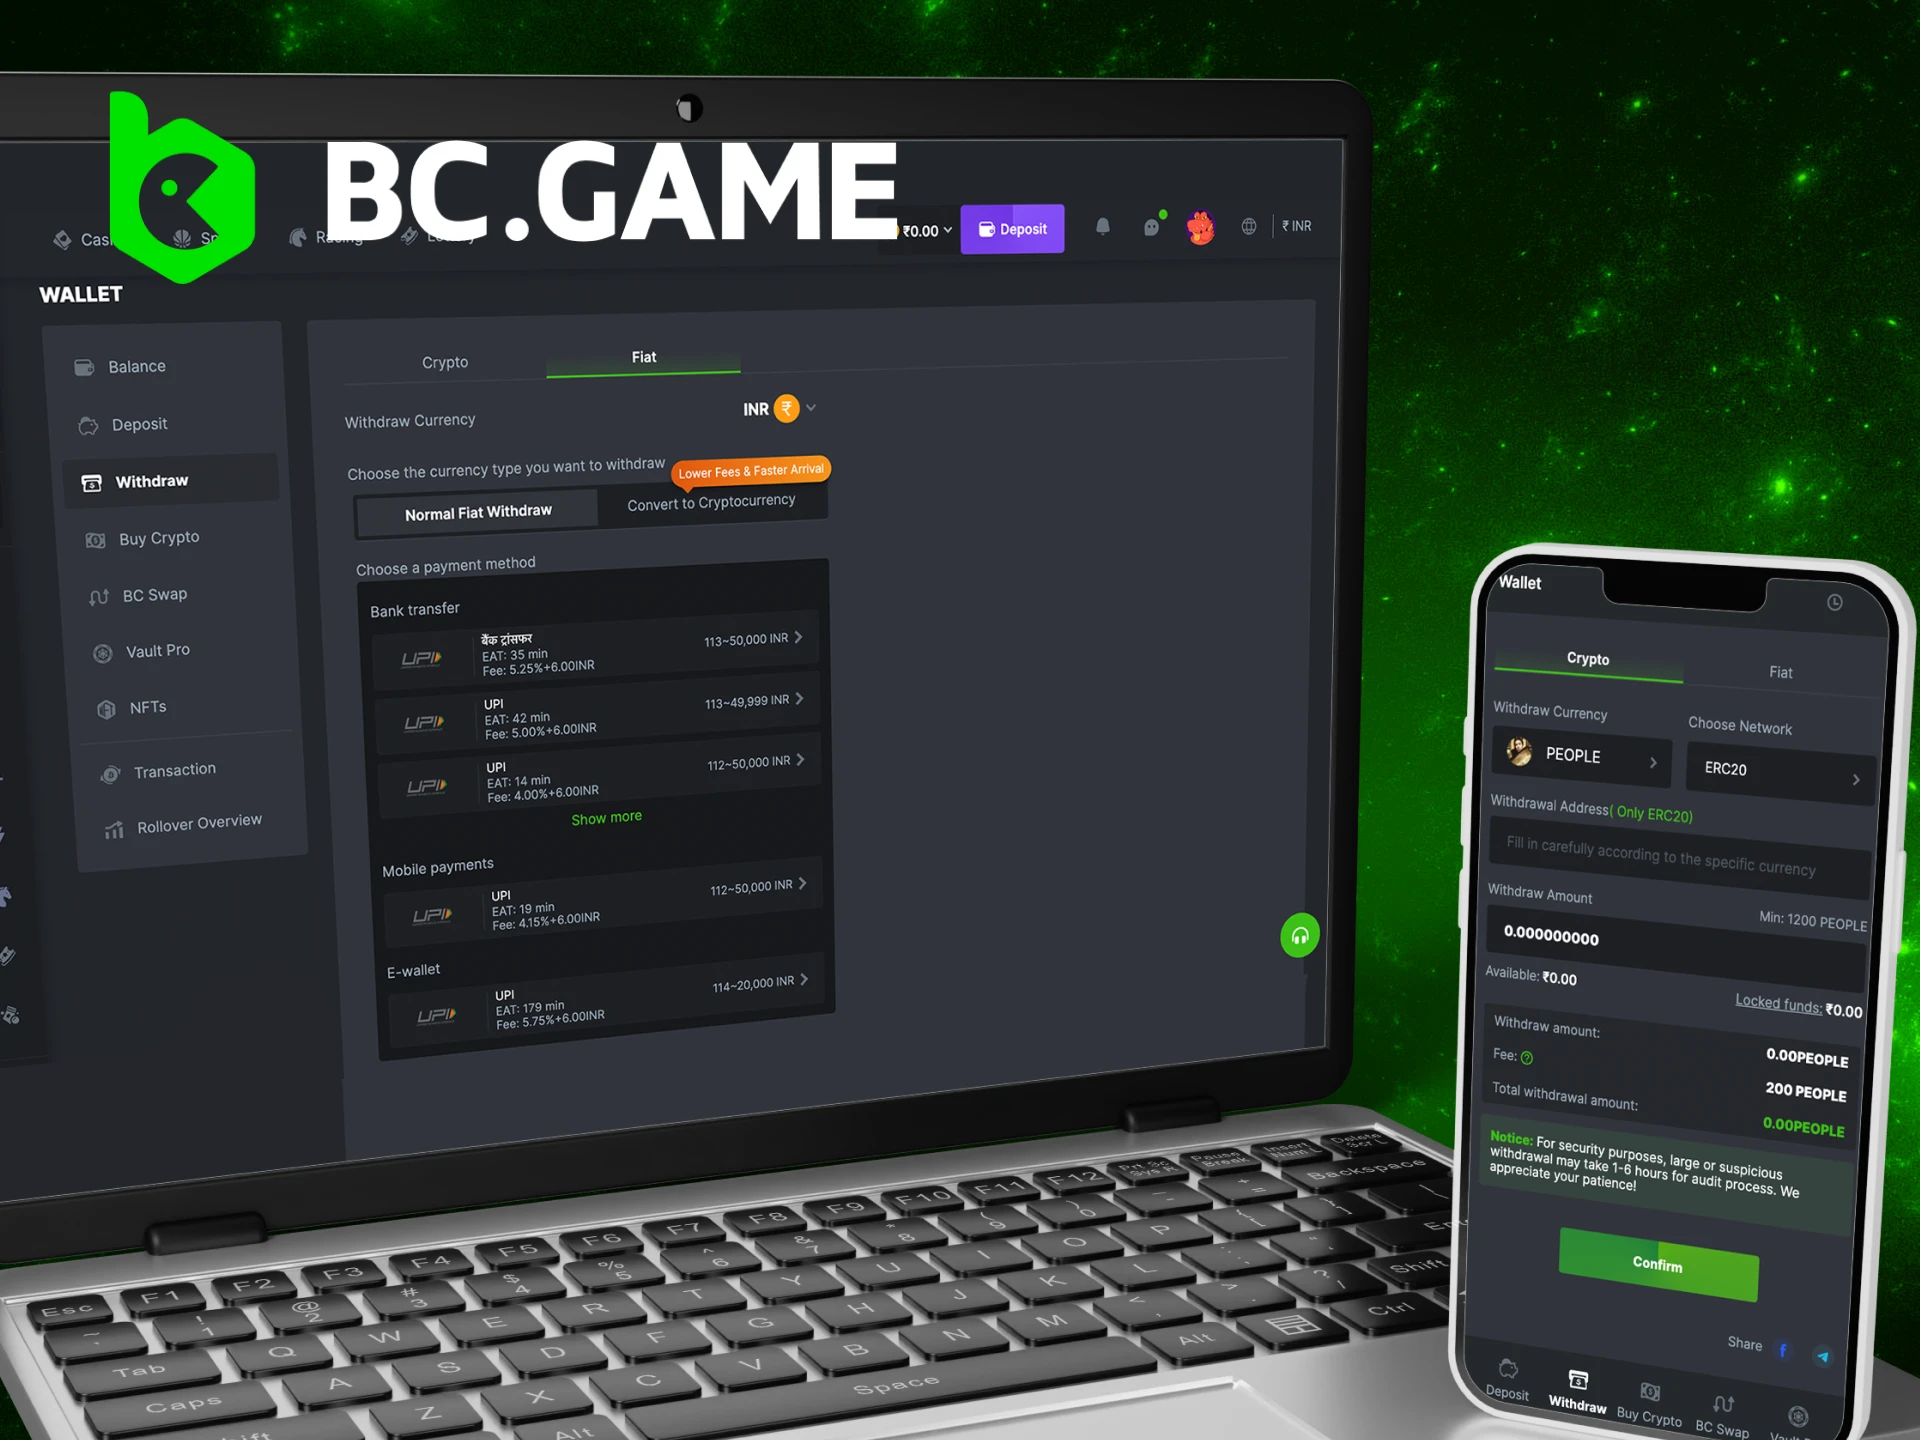 How to withdraw bonus money on the BC Game website.